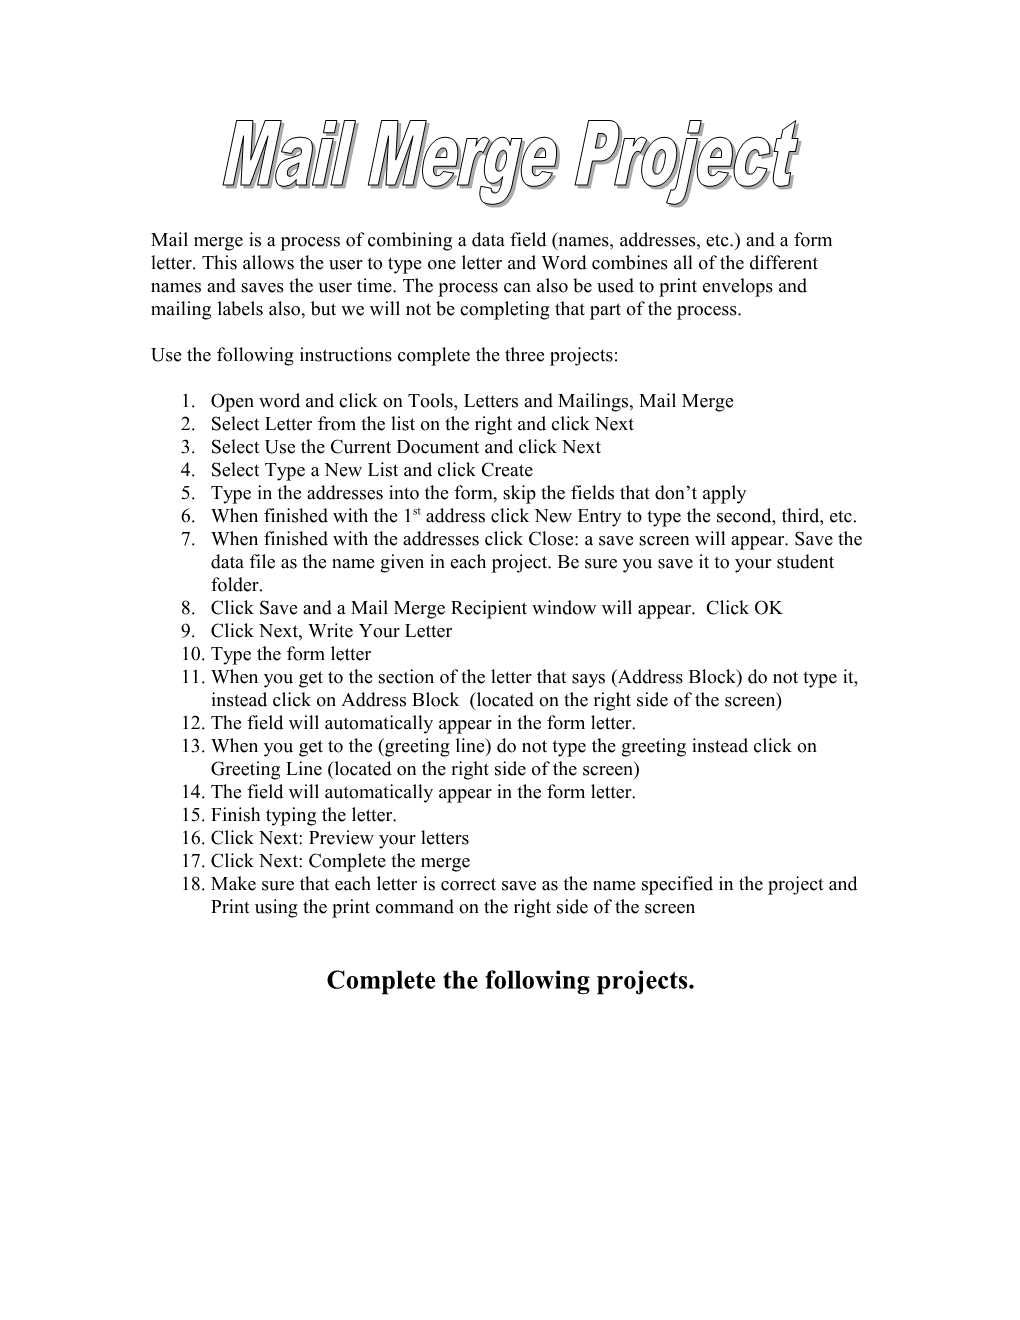 Use the Following Instructions Complete the Three Projects